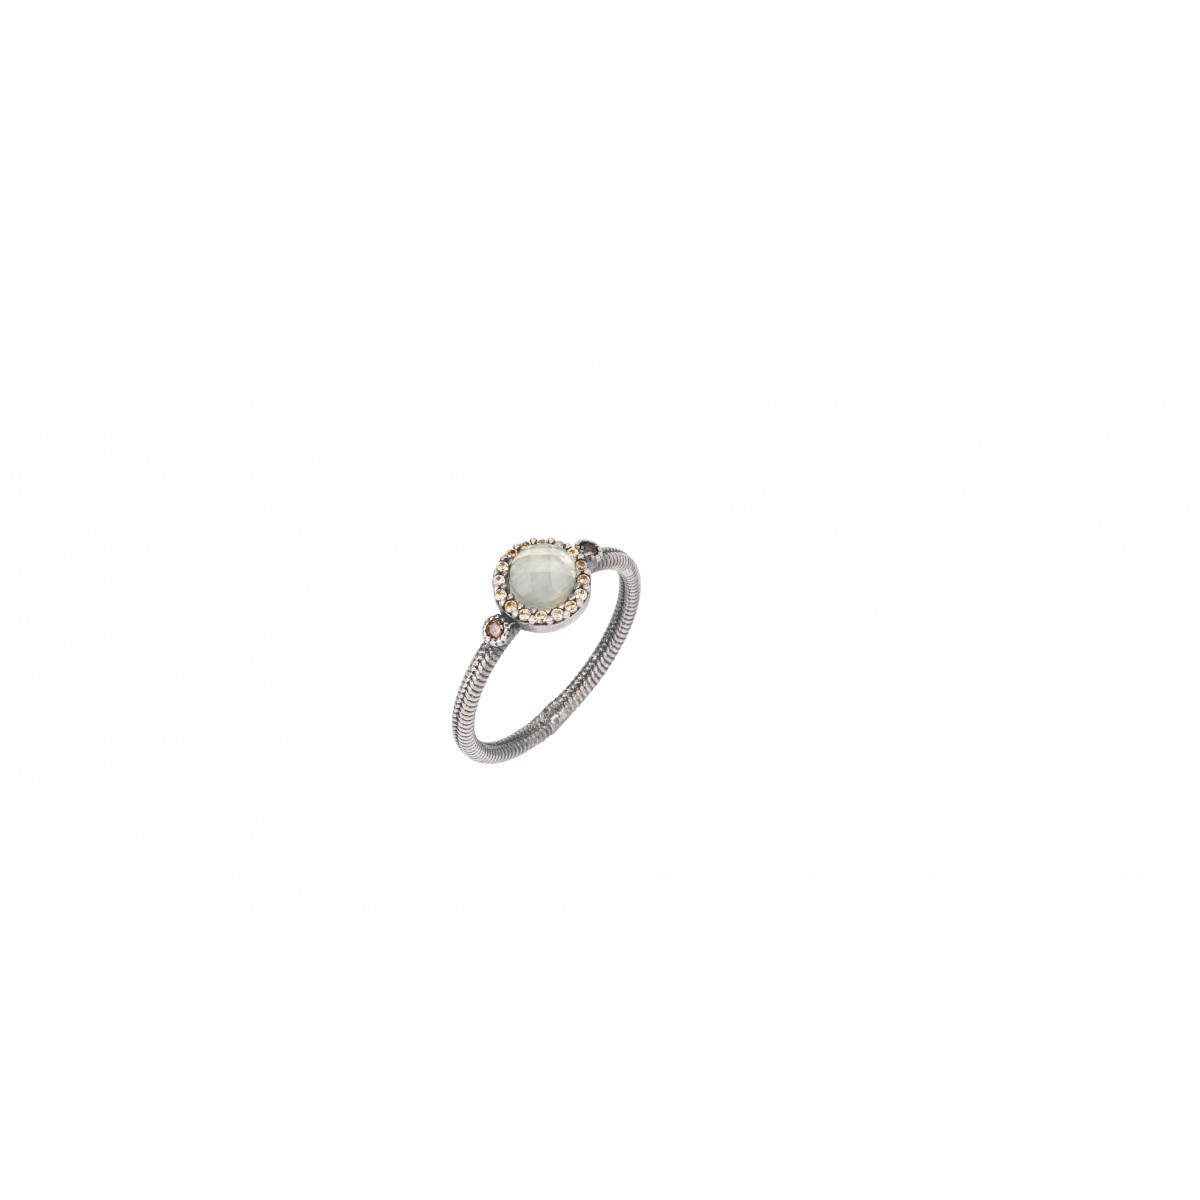 CHALCEDONY SUNFIELD RING - AN060653